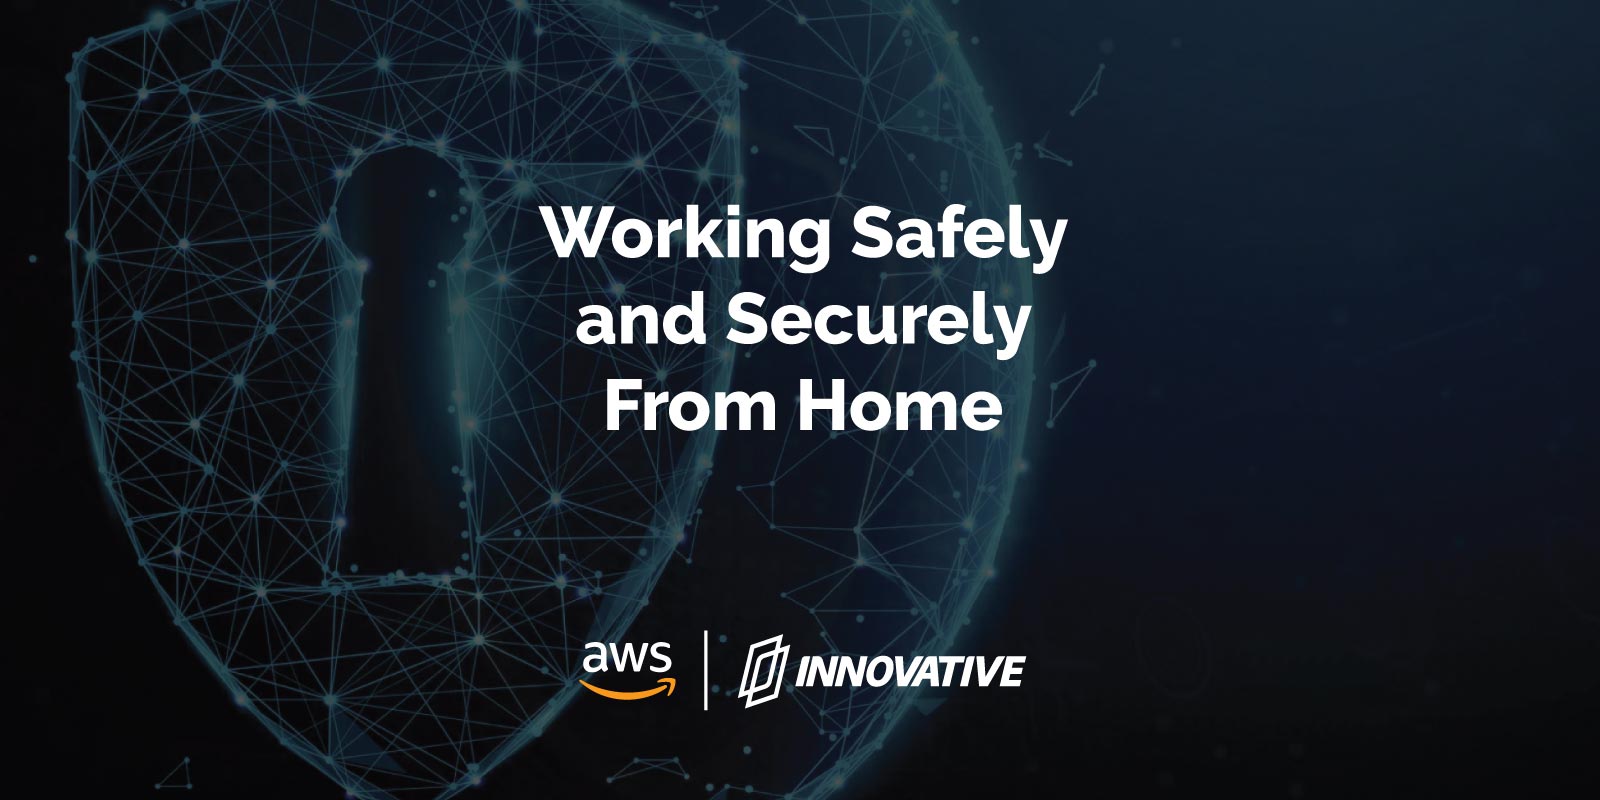 Working Safely and Securely From Home